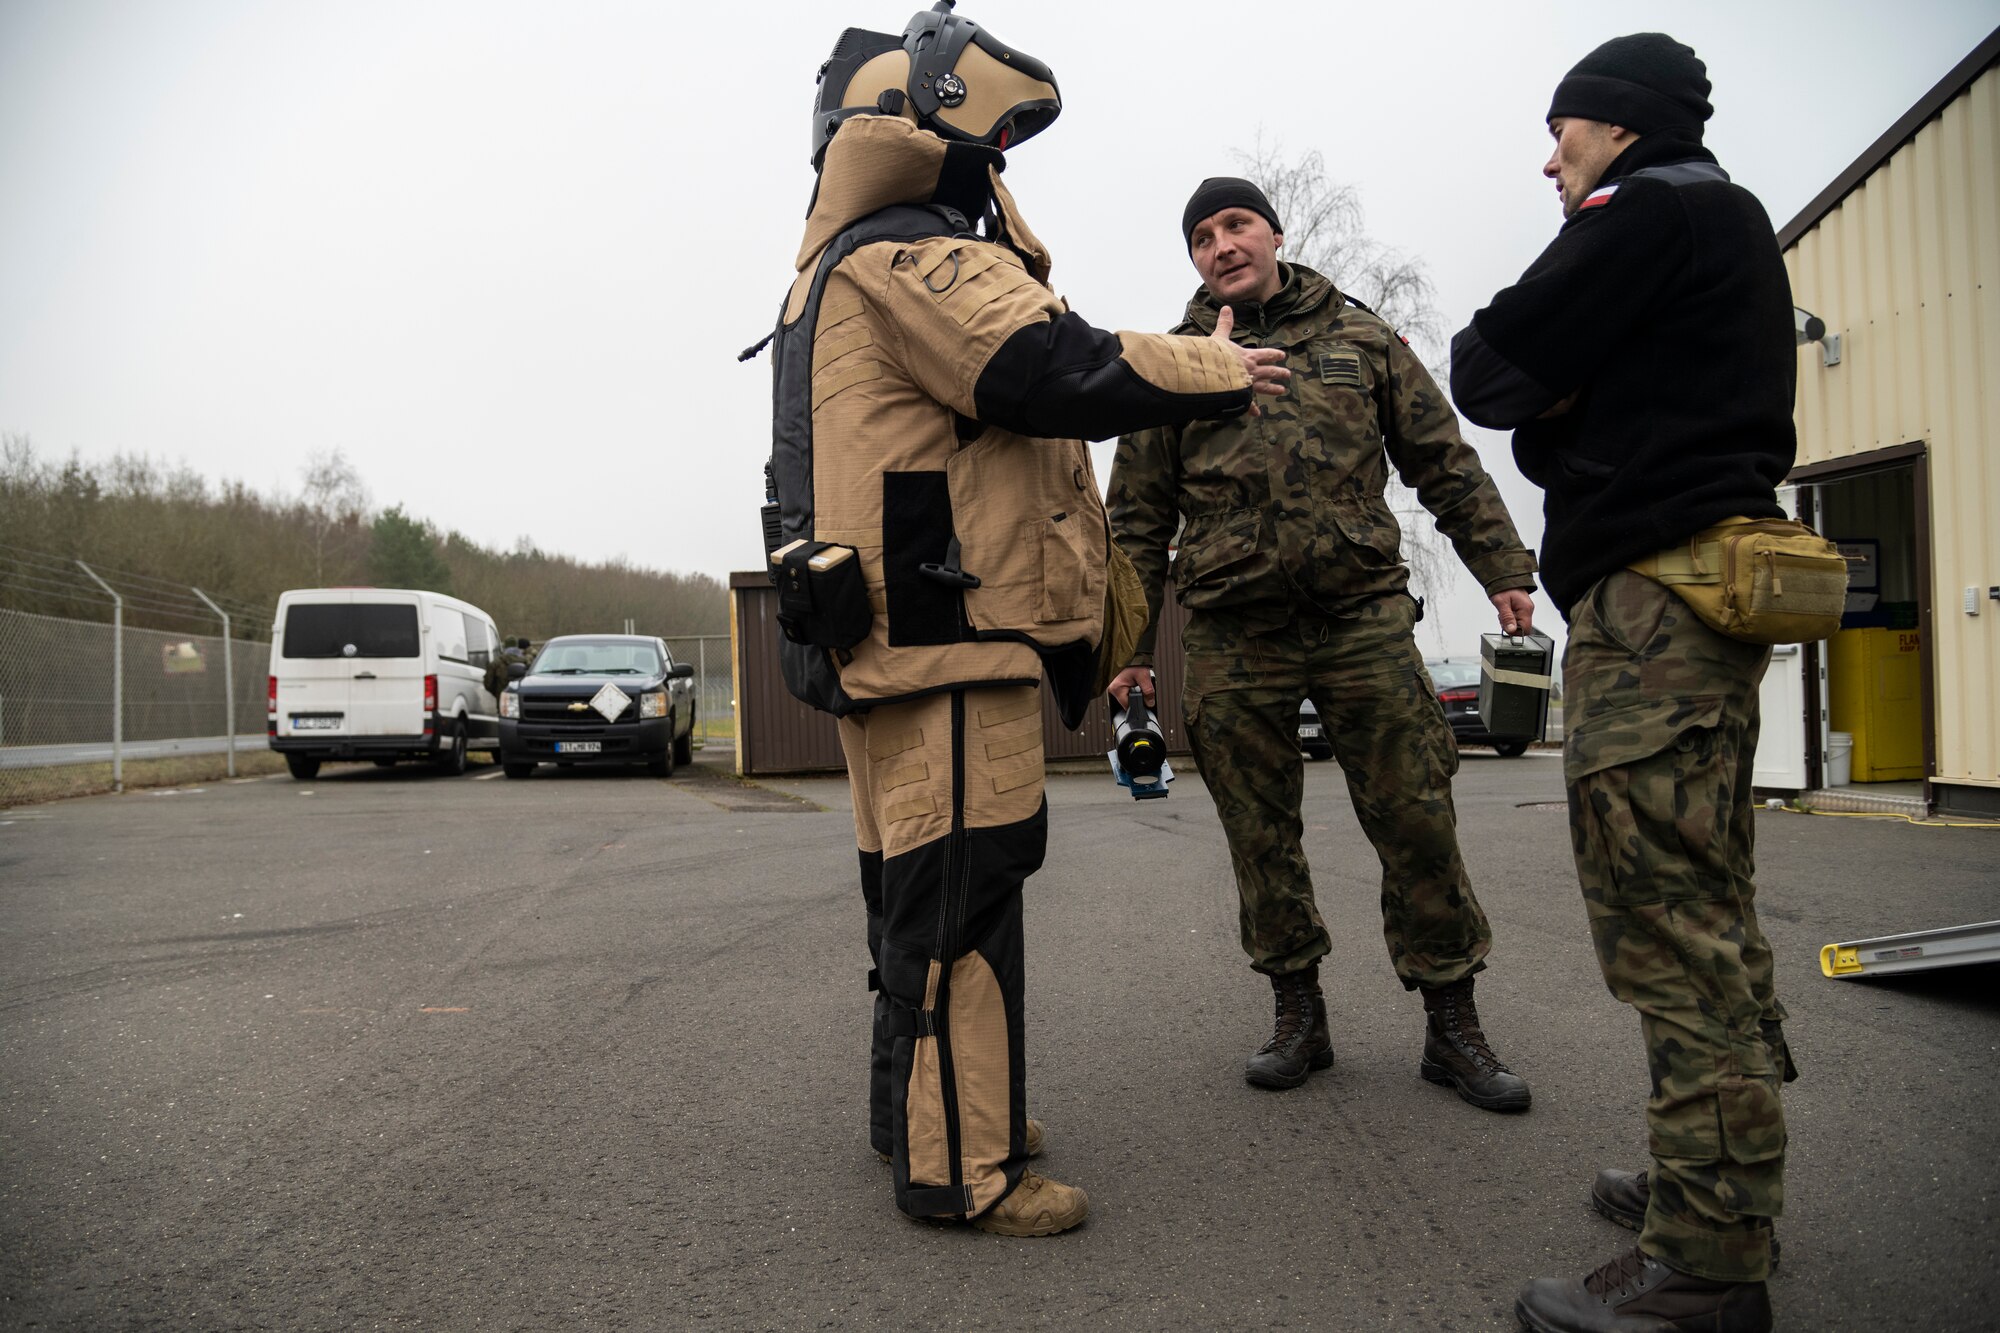 A U.S. Air Force Explosive Ordnance Disposal technician, assigned to the 52nd Fighter Wing Civil Engineer Squadron, discusses with two Polish Improvised Explosive Device unit members about IED access procedures during the ongoing familiarization and subject-matter expert exchange at Spangdahlem Air Base, Dec. 9, 2021. These NATO partners routinely train together to improve interoperability and cooperation, as recently as September. These skills are critical response capabilities to enhance the security and safety of both nations. (U.S. Air Force photo by Senior Airman Ali Stewart)